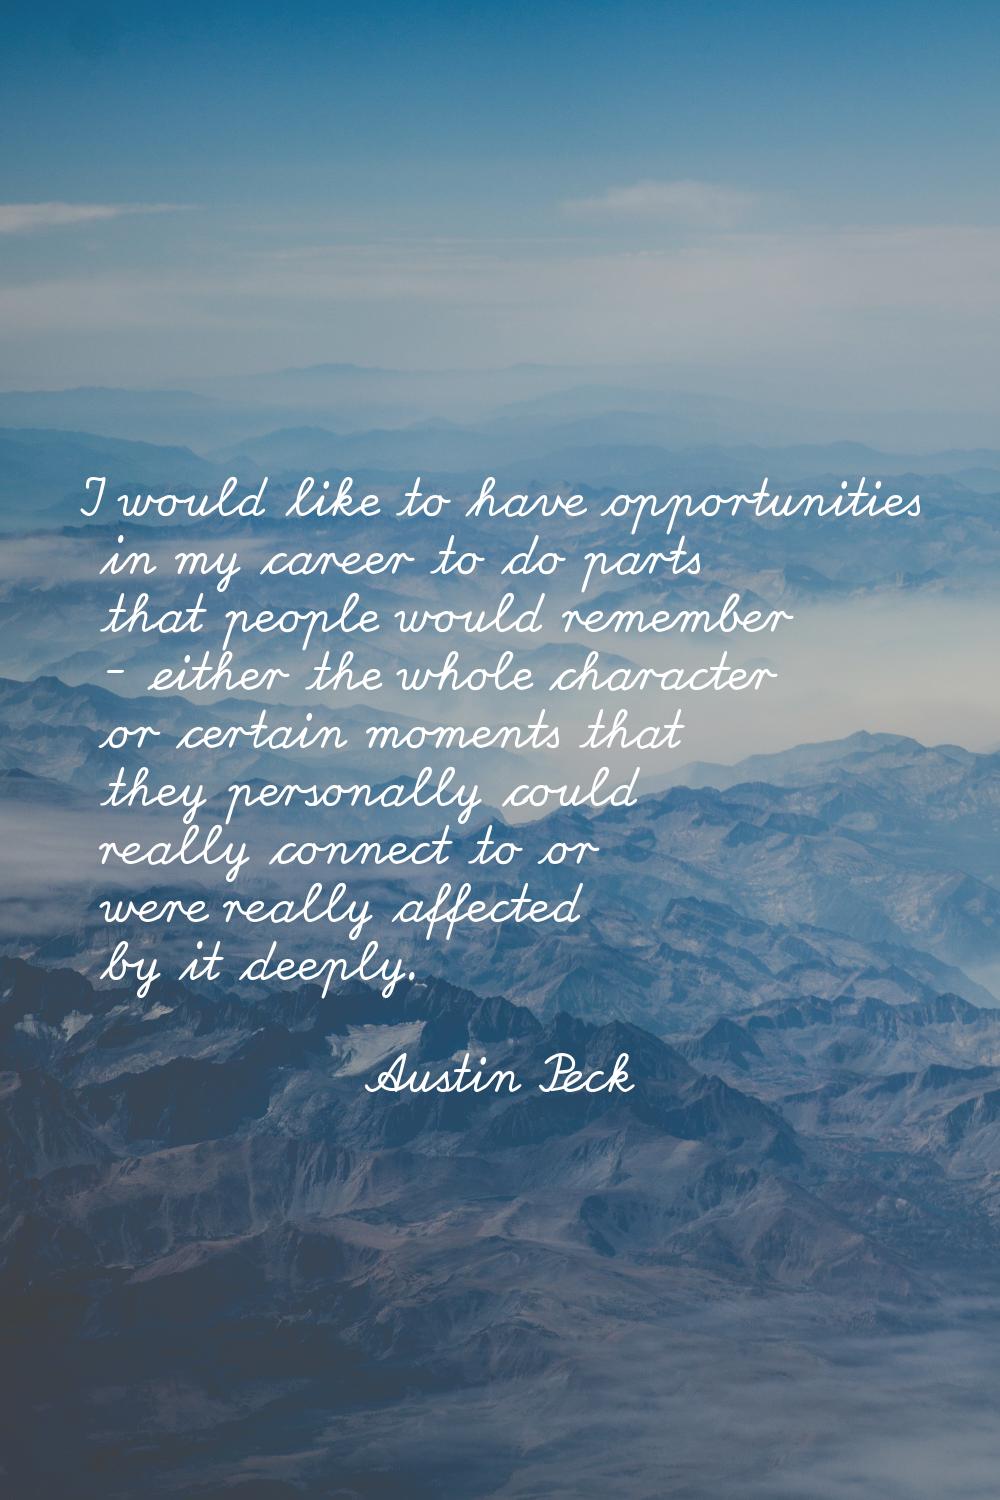 I would like to have opportunities in my career to do parts that people would remember - either the